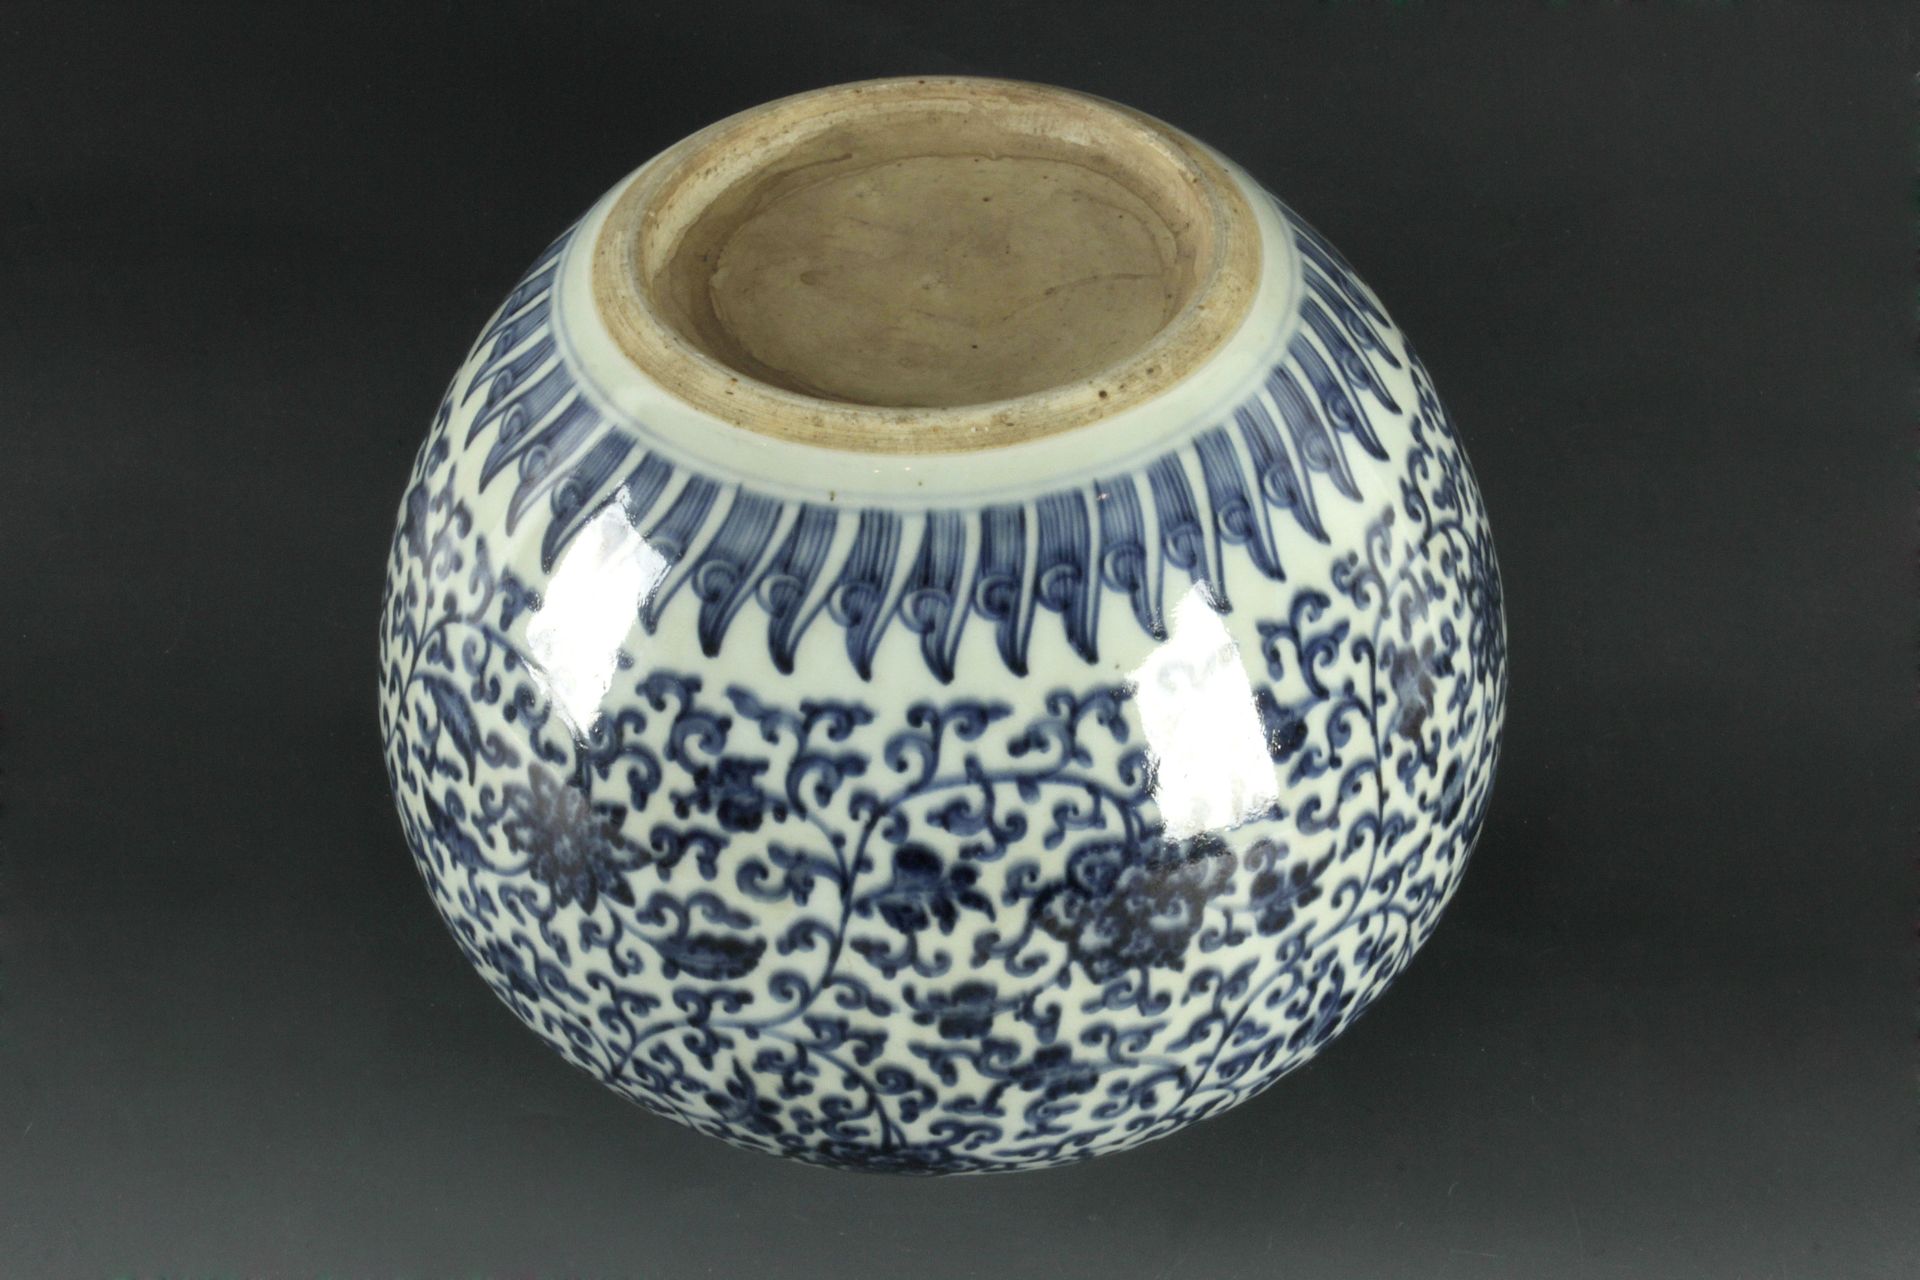 A 19th century Chinese Qing dynasty porcelain vase - Image 2 of 2